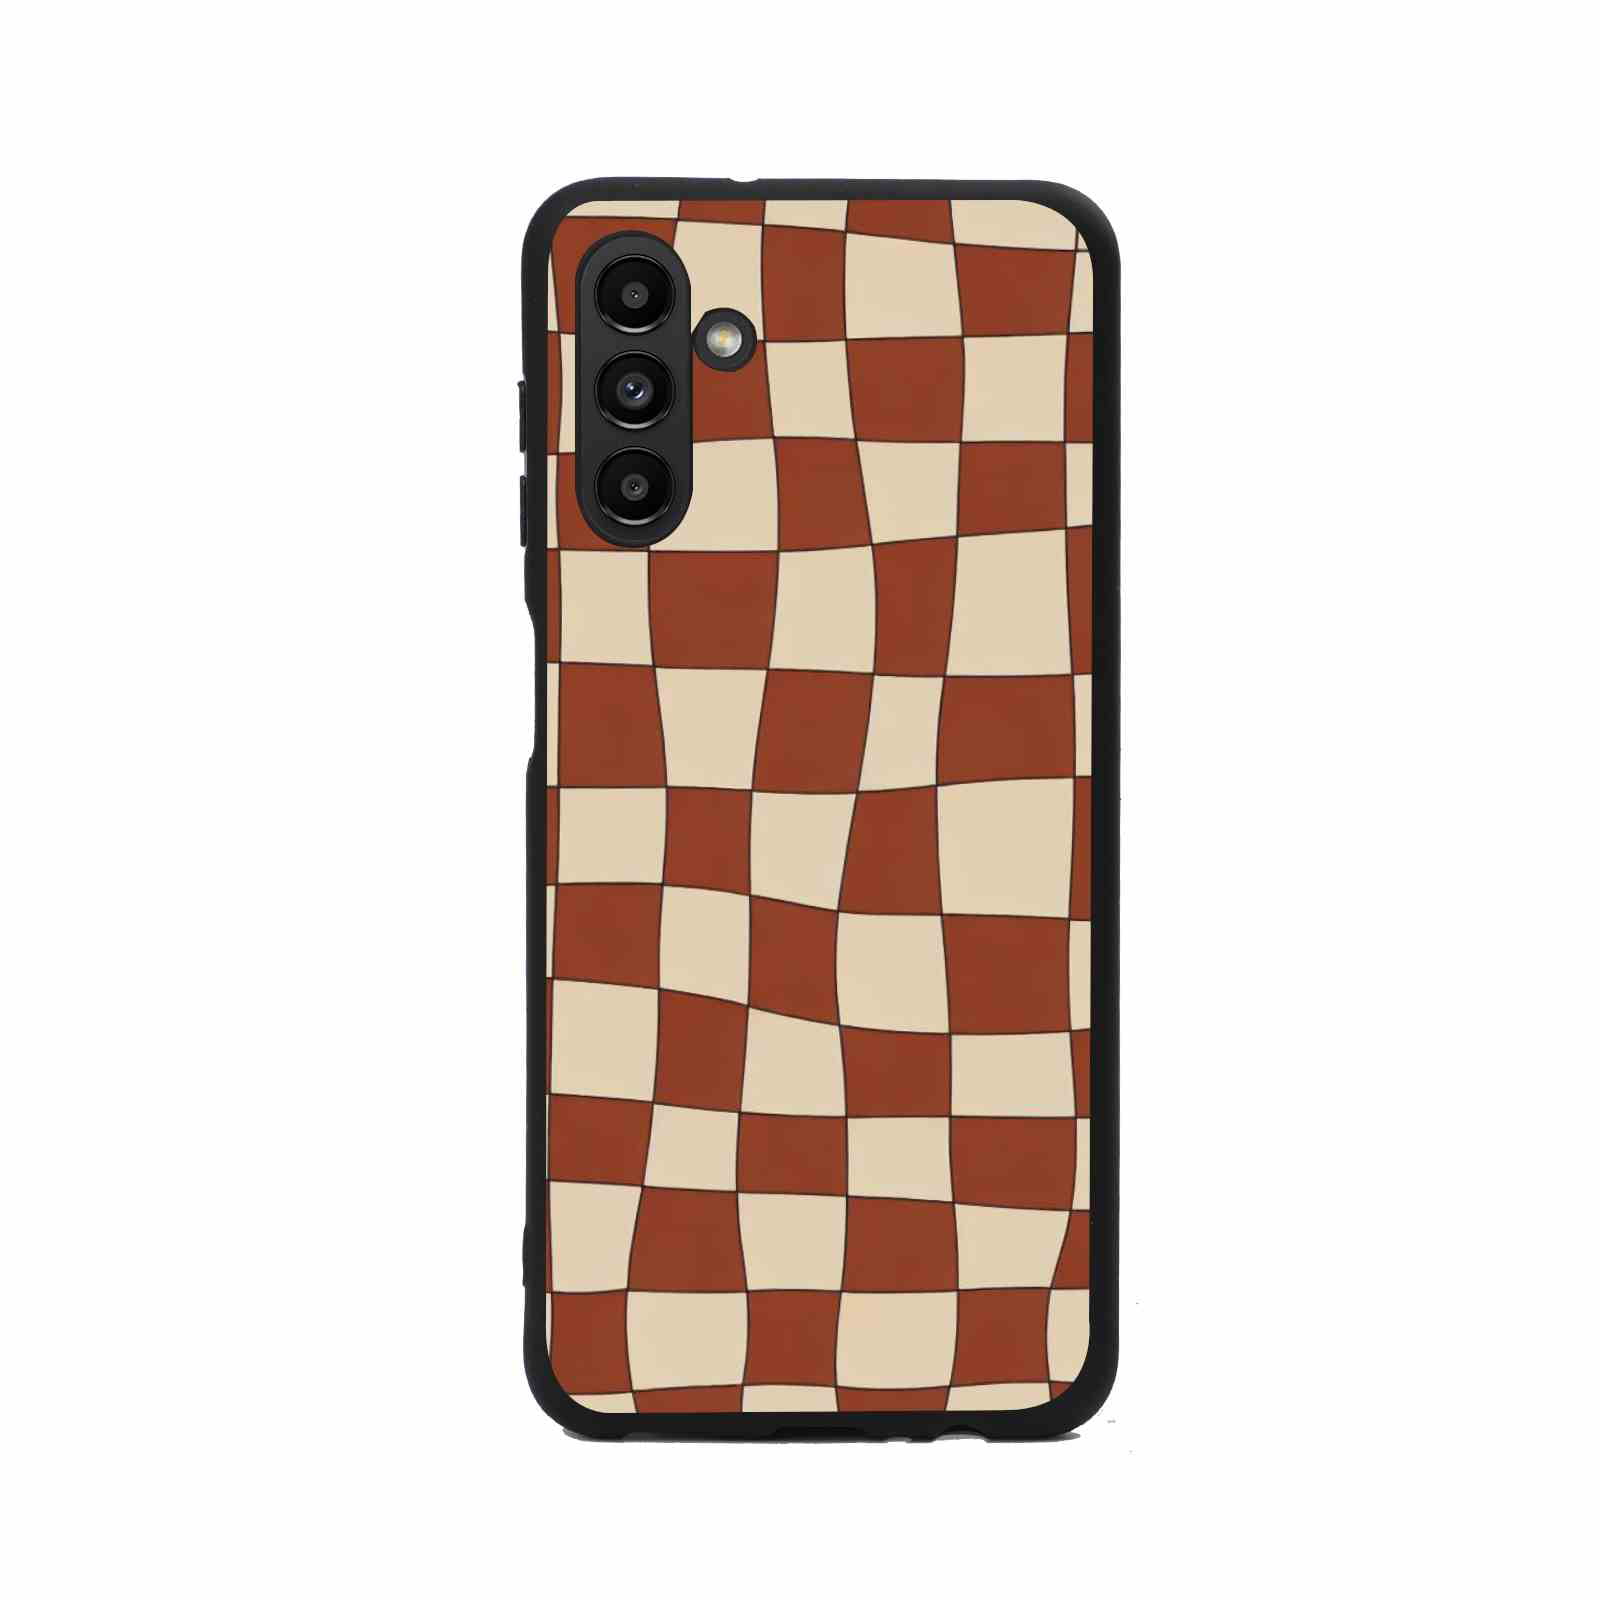 Trendy-Checker-Pattern-35 phone case for Samsung Galaxy A13 5G for Women  Men Gifts,Soft silicone Style Shockproof - Trendy-Checker-Pattern-35 Case  for Samsung Galaxy A13 5G 